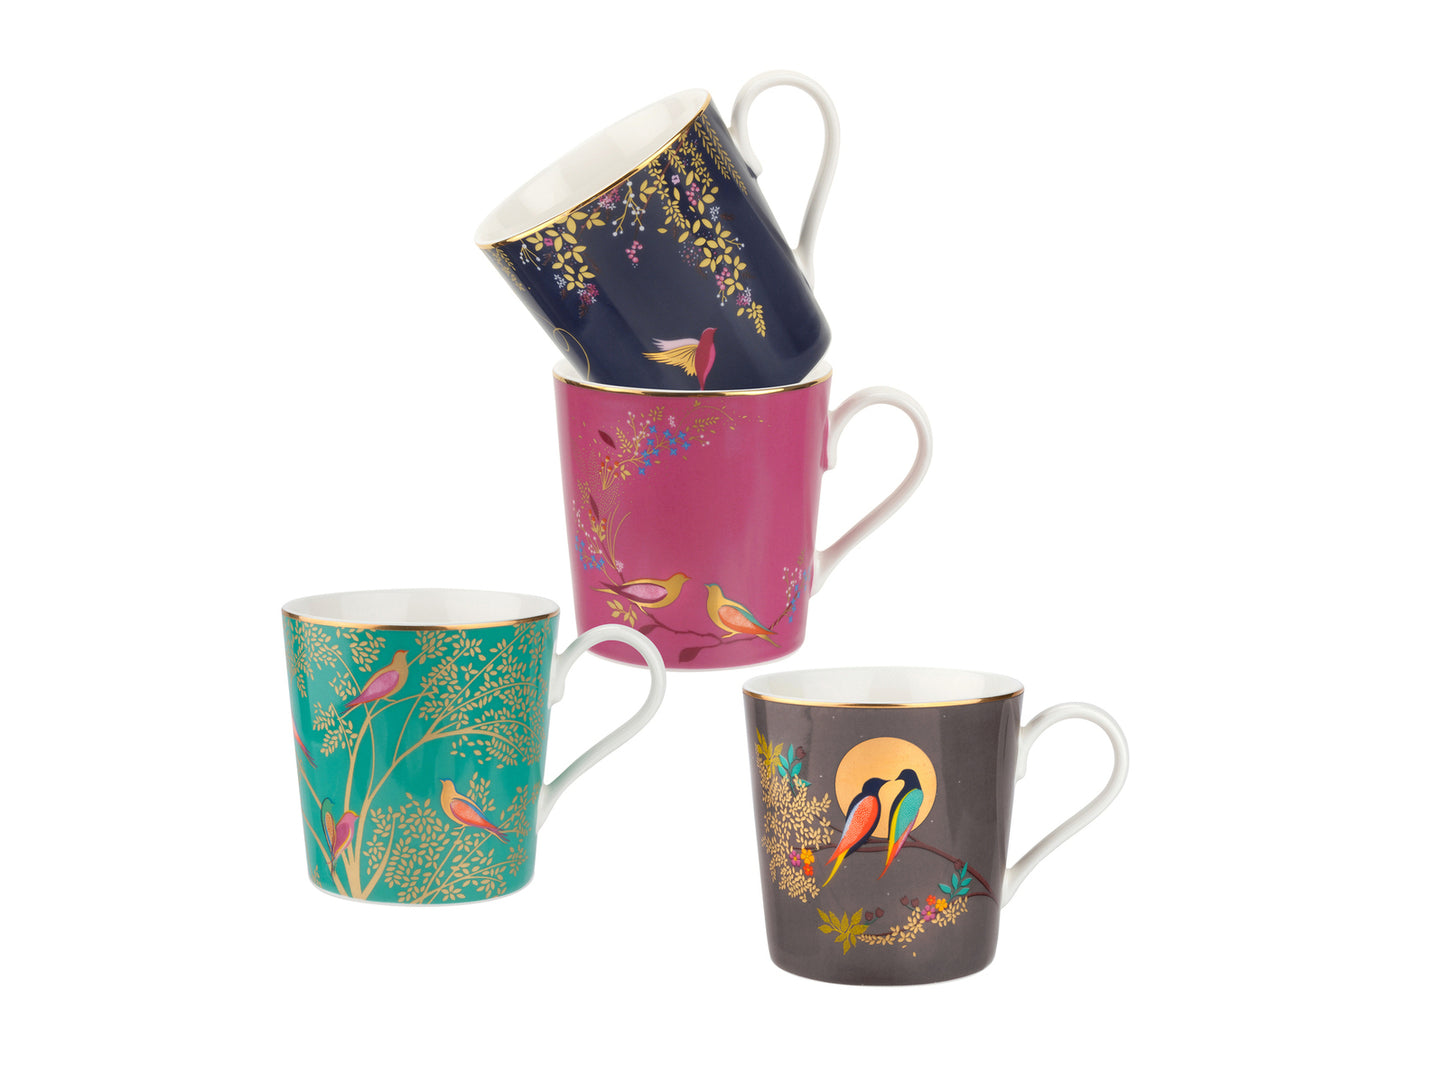 Sara Miller London Chelsea Collection Assorted Mugs – Set of 4